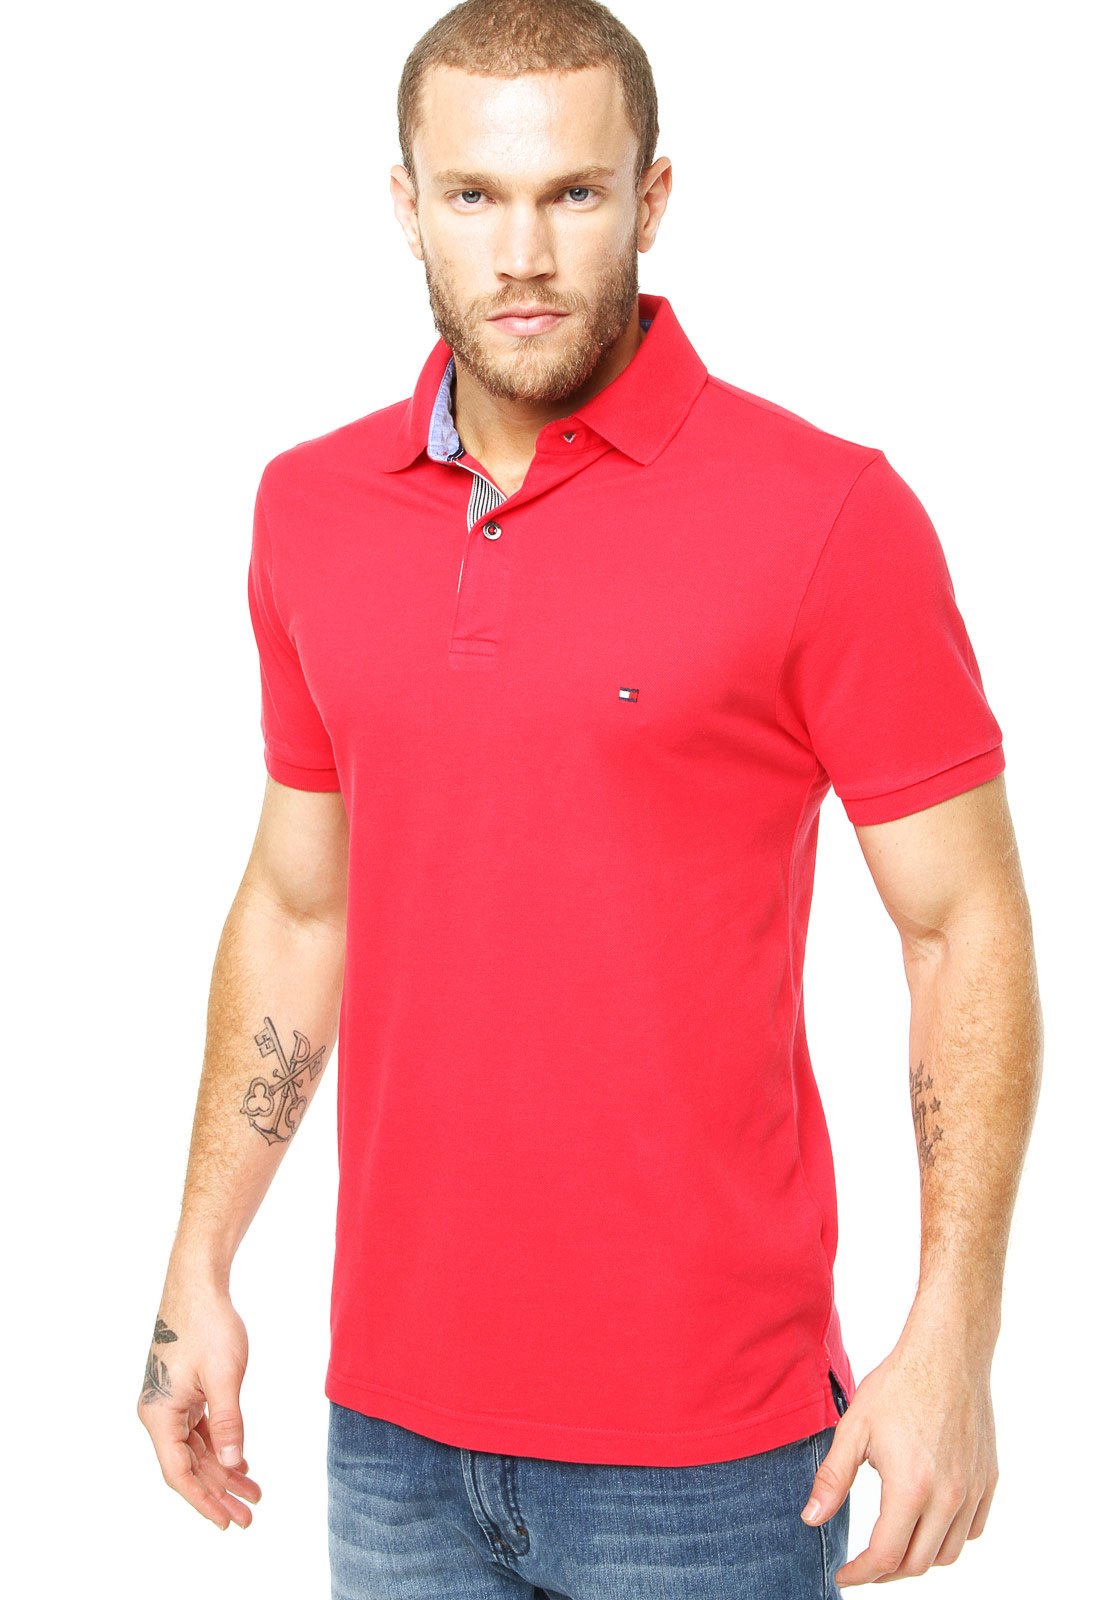 tommy hilfiger polo rosa